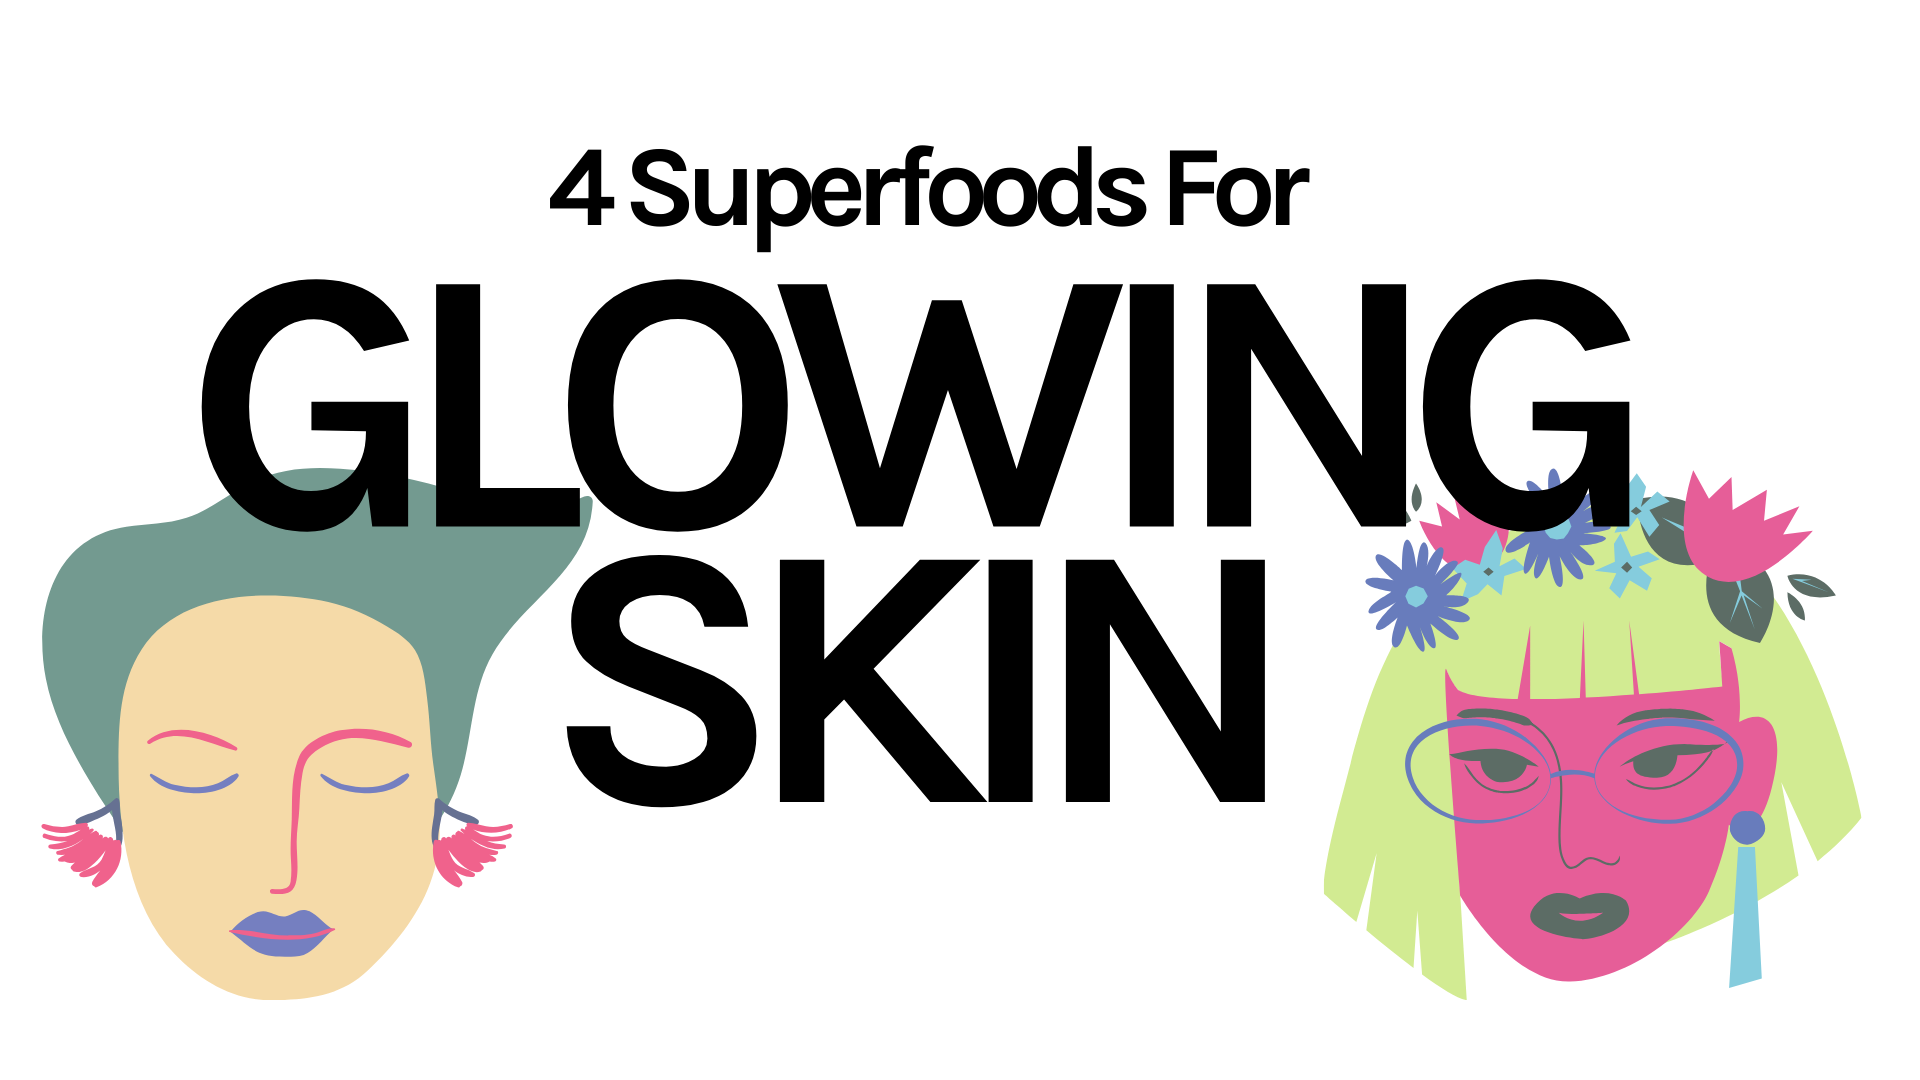 4 Superfoods For Glowing Skin